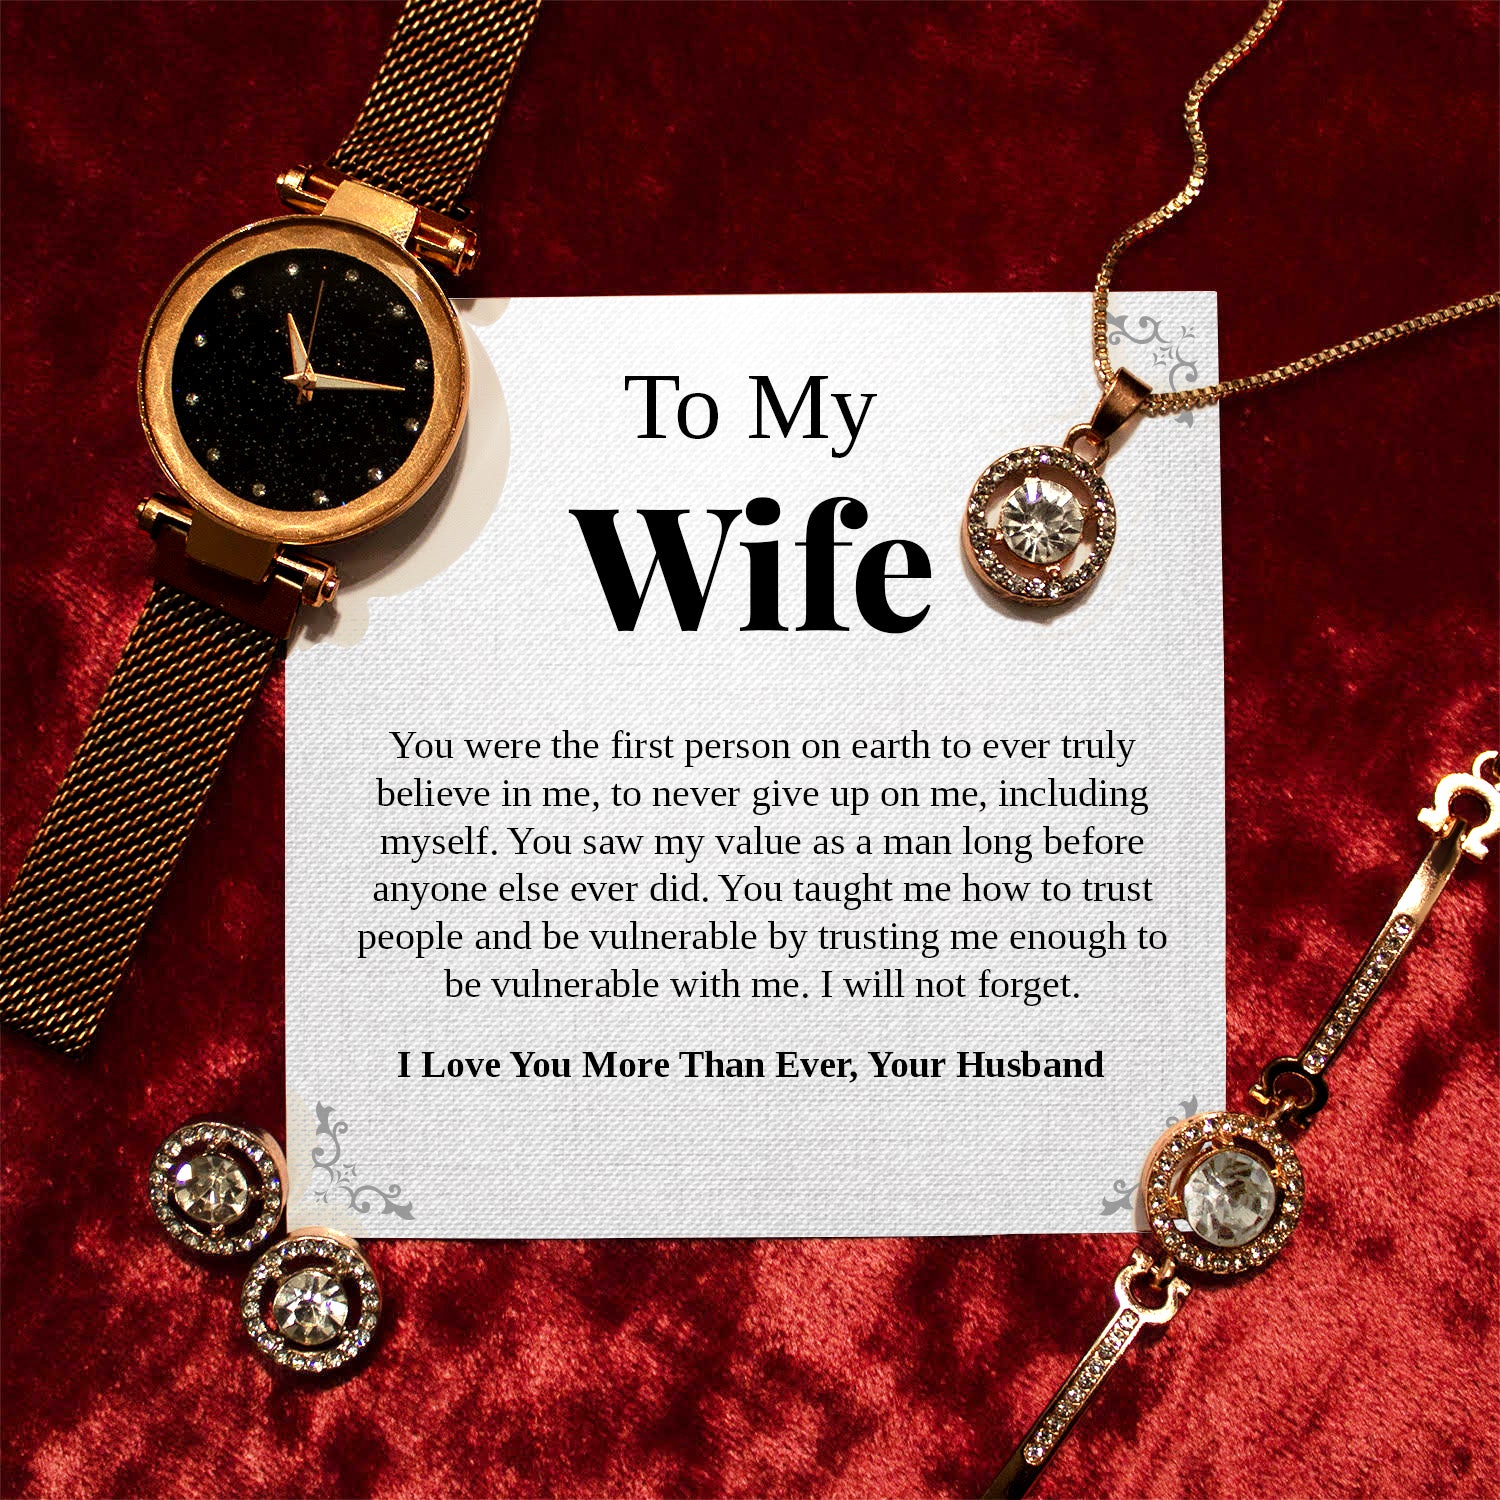 To My Wife | "The First Person" | Cosmopolitan Set